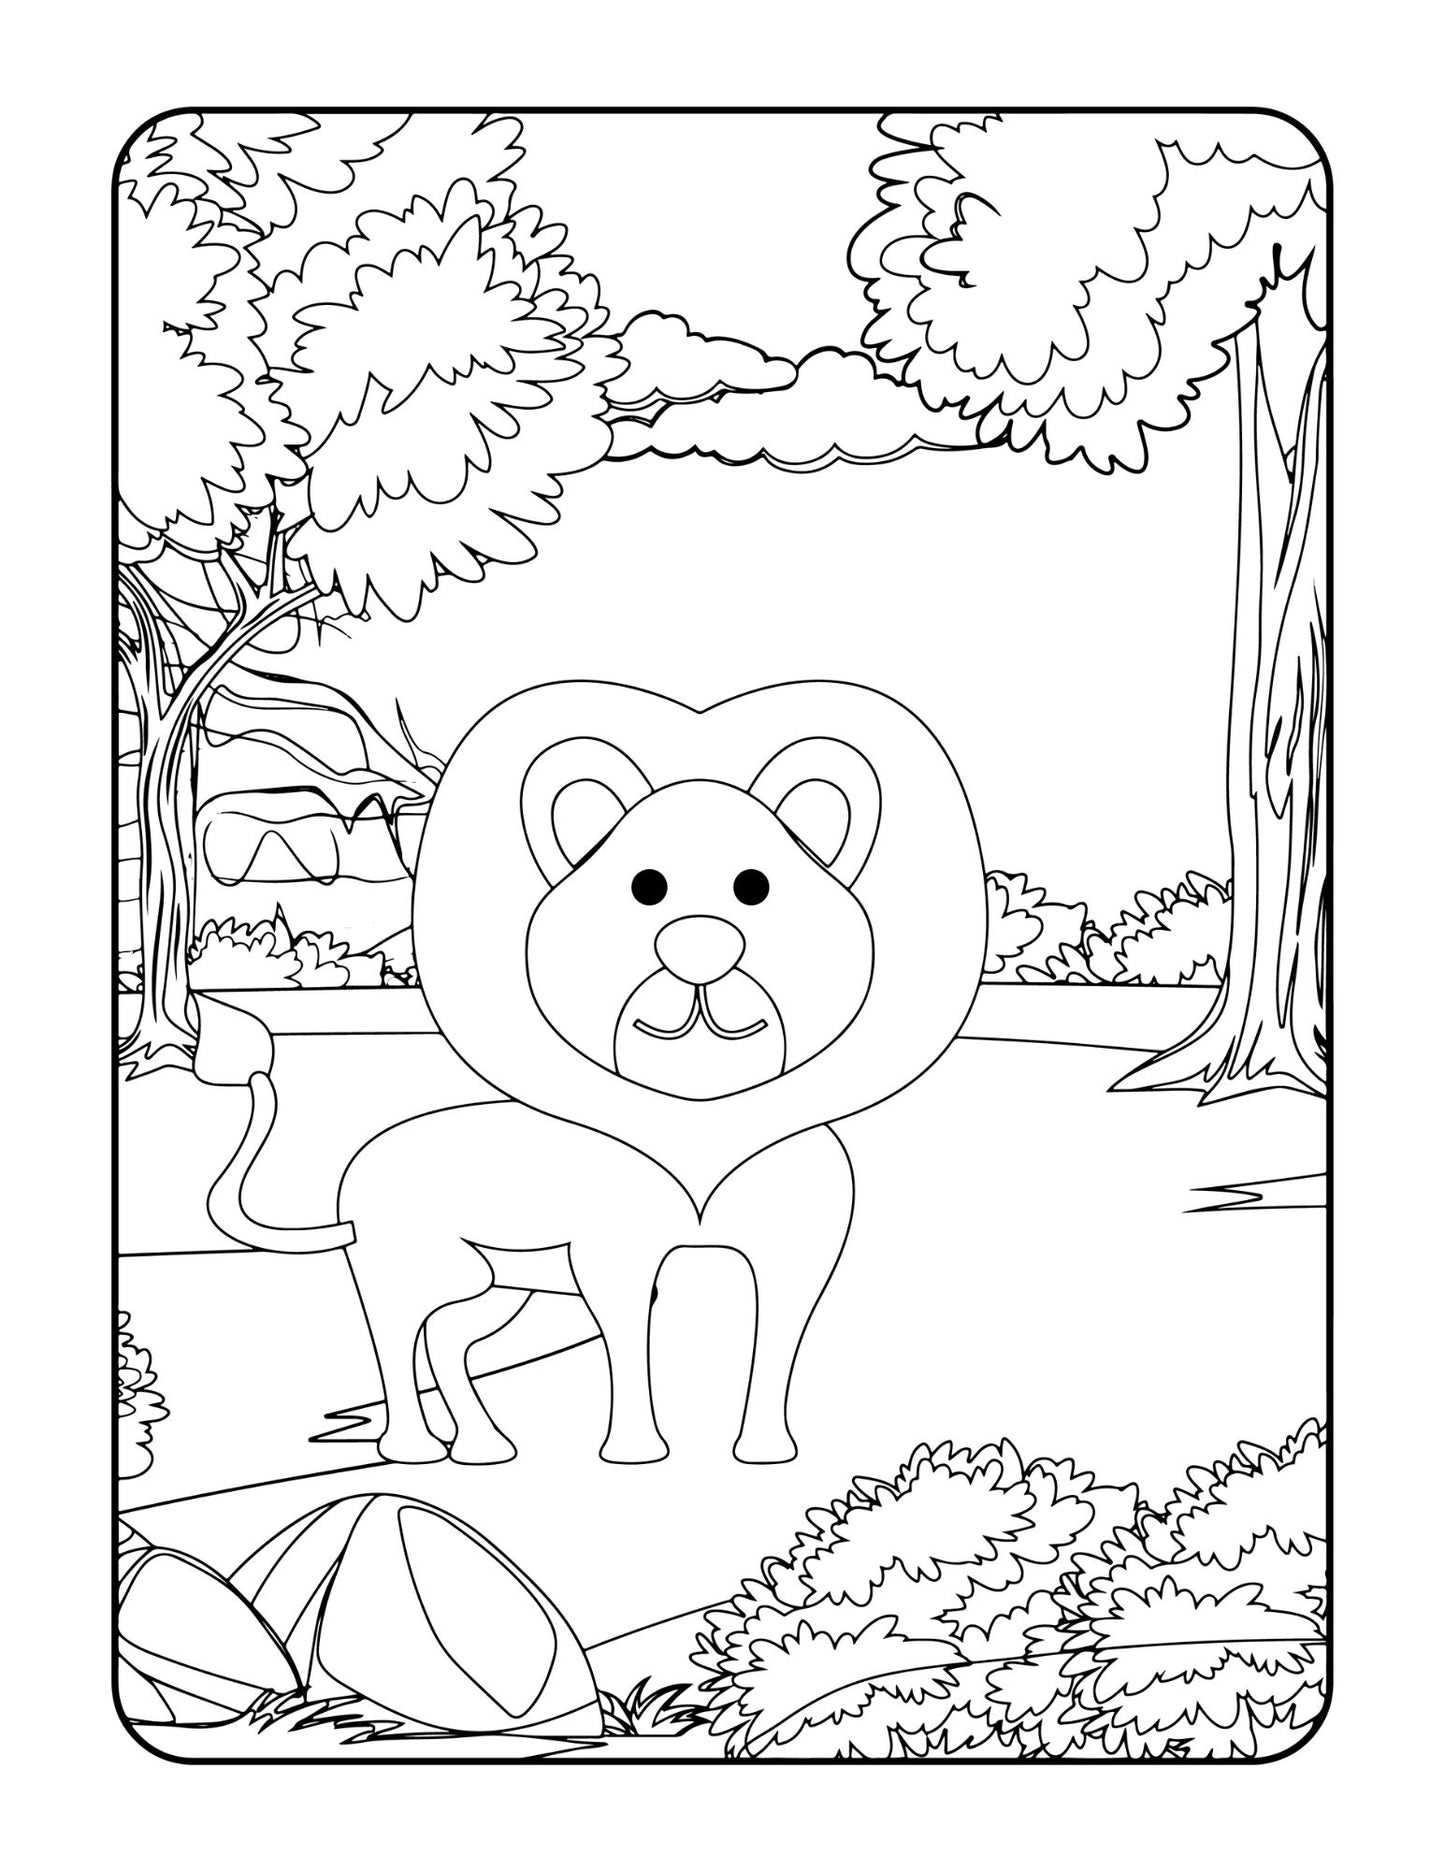 Forest Animals Coloring Book for Kids Adults Coloring Book Gift Coloring Pages Kids Colouring Book for Kids Coloring Pages Gift for Adults